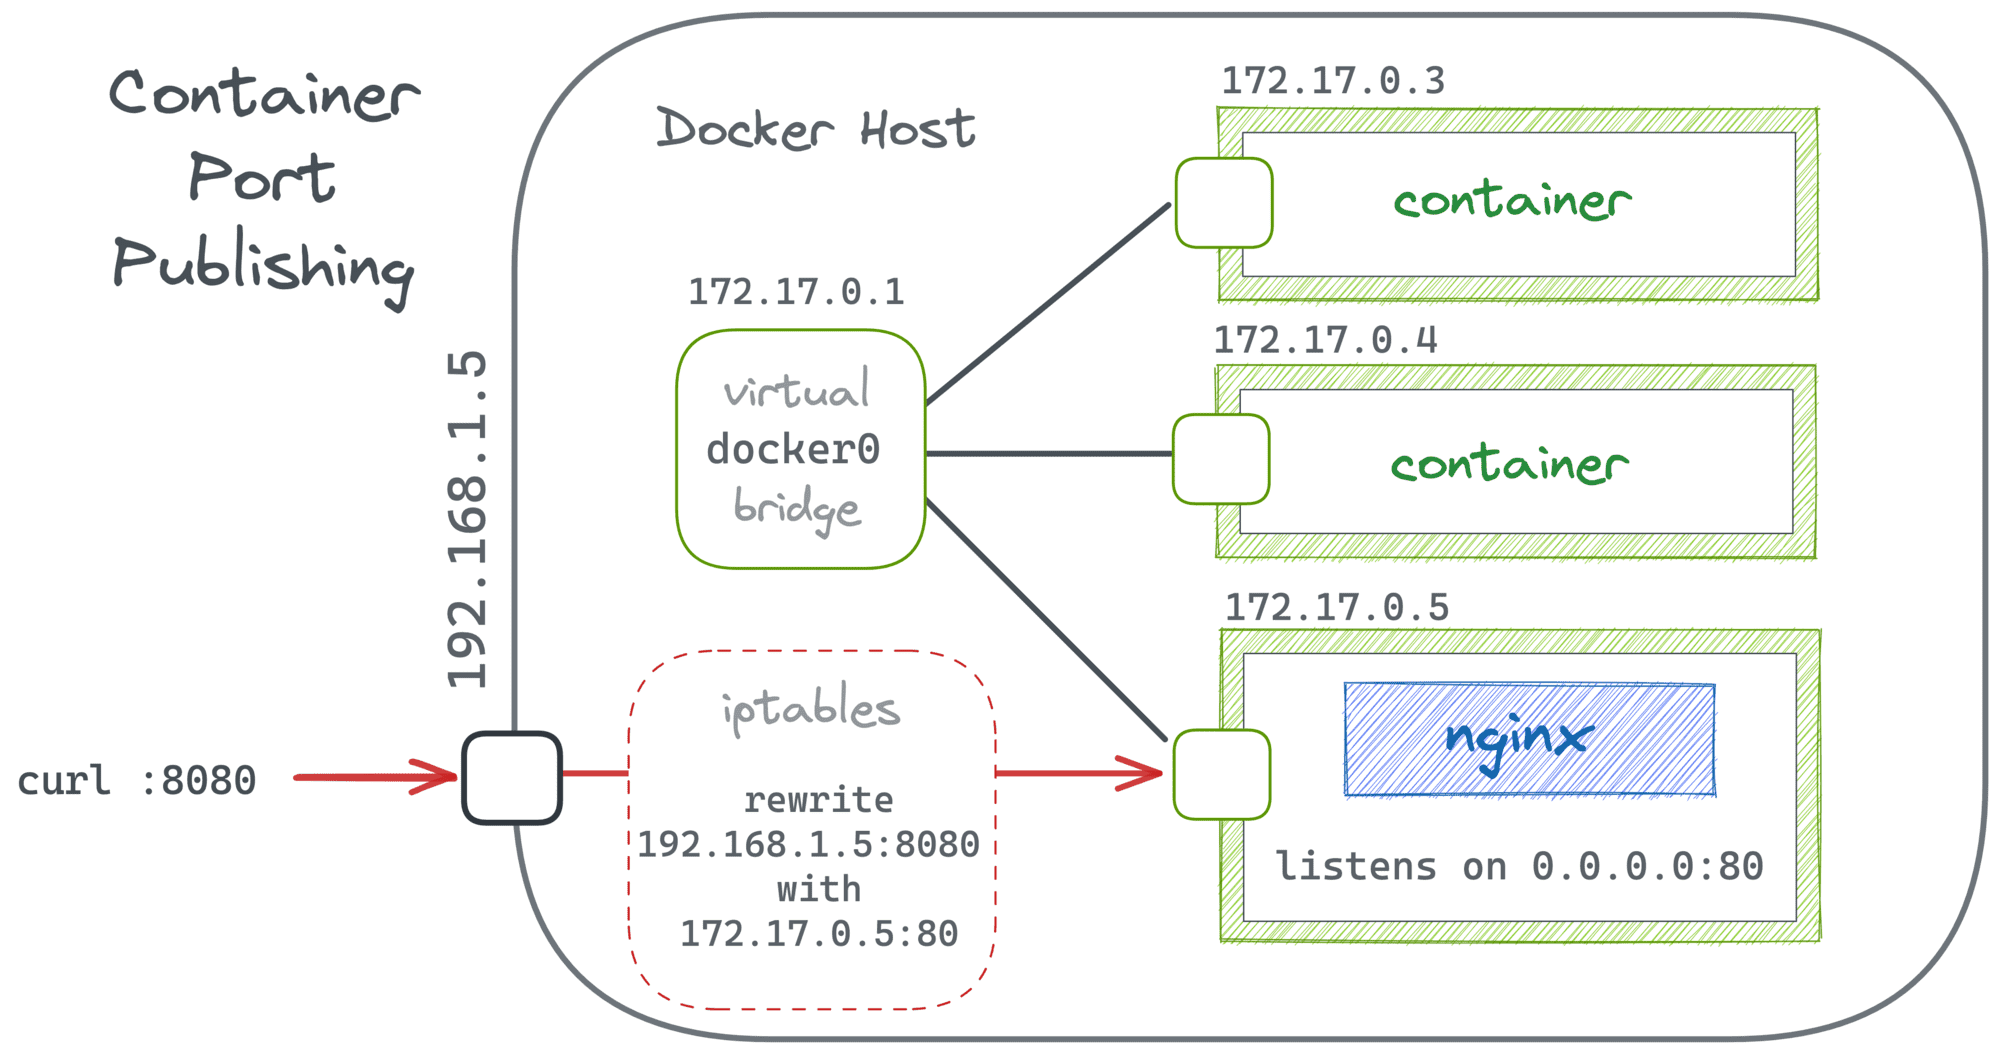 Publishing container ports with Docker Engine.